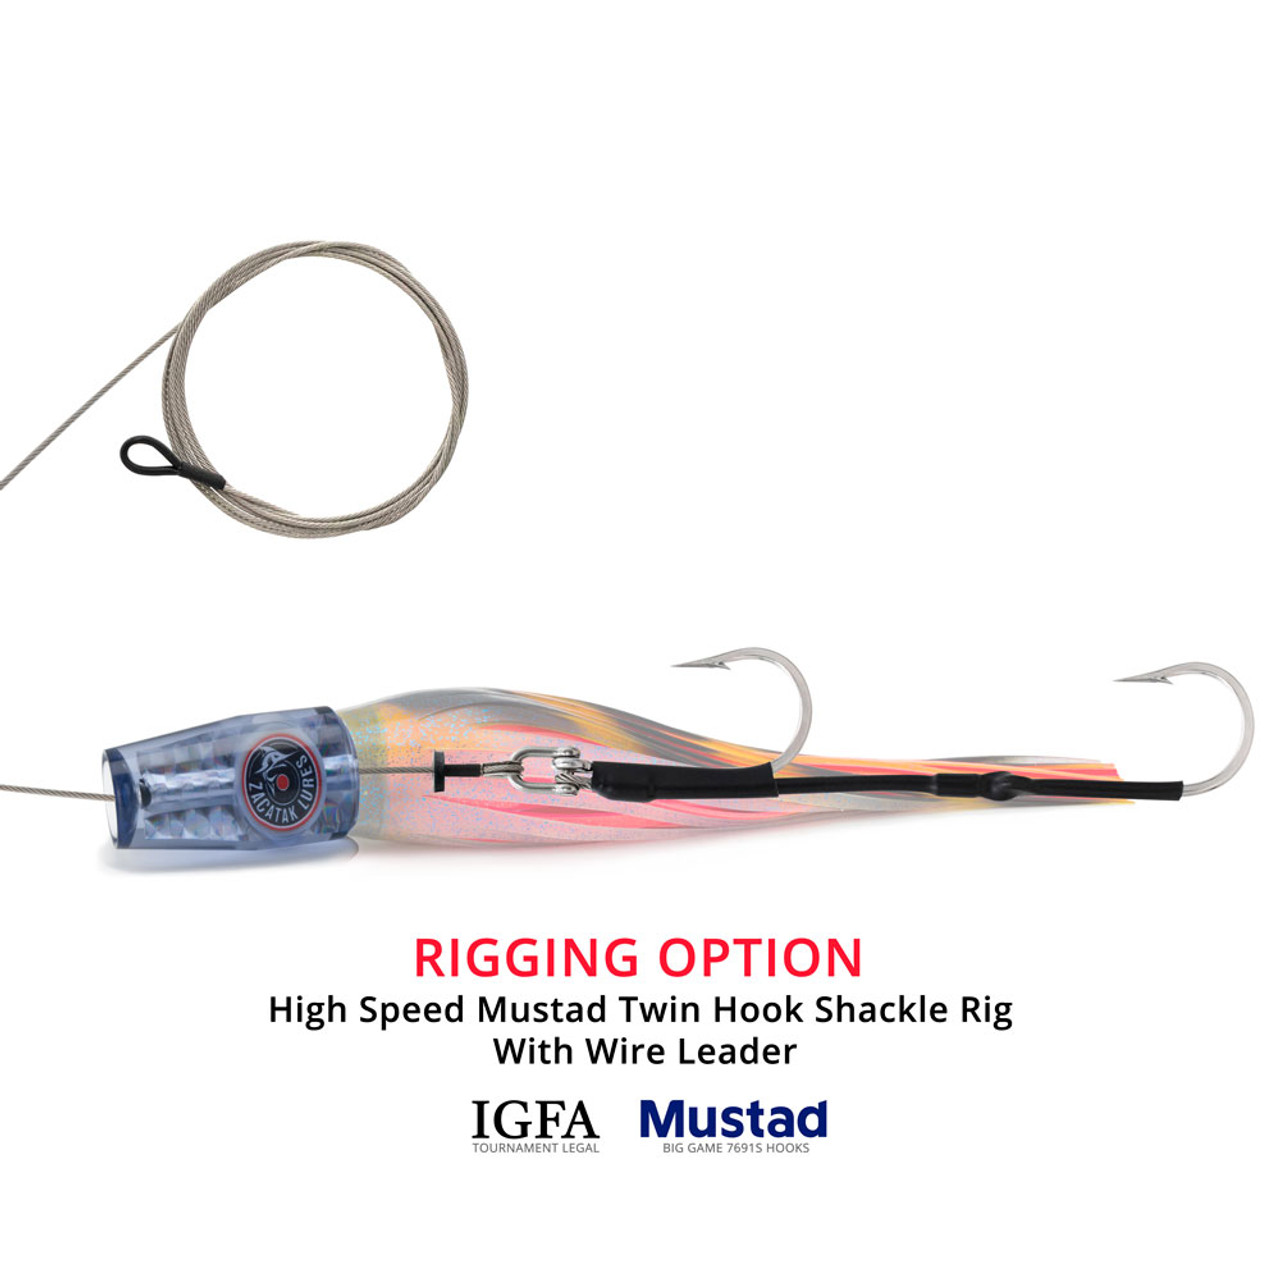 https://cdn11.bigcommerce.com/s-sv4r4mic/images/stencil/1280x1280/products/9055/49222/zacatak-lures-high-speed-rigging-option-twin-hook-shackle-rig-smoka__75961.1671433923.jpg?c=2?imbypass=on